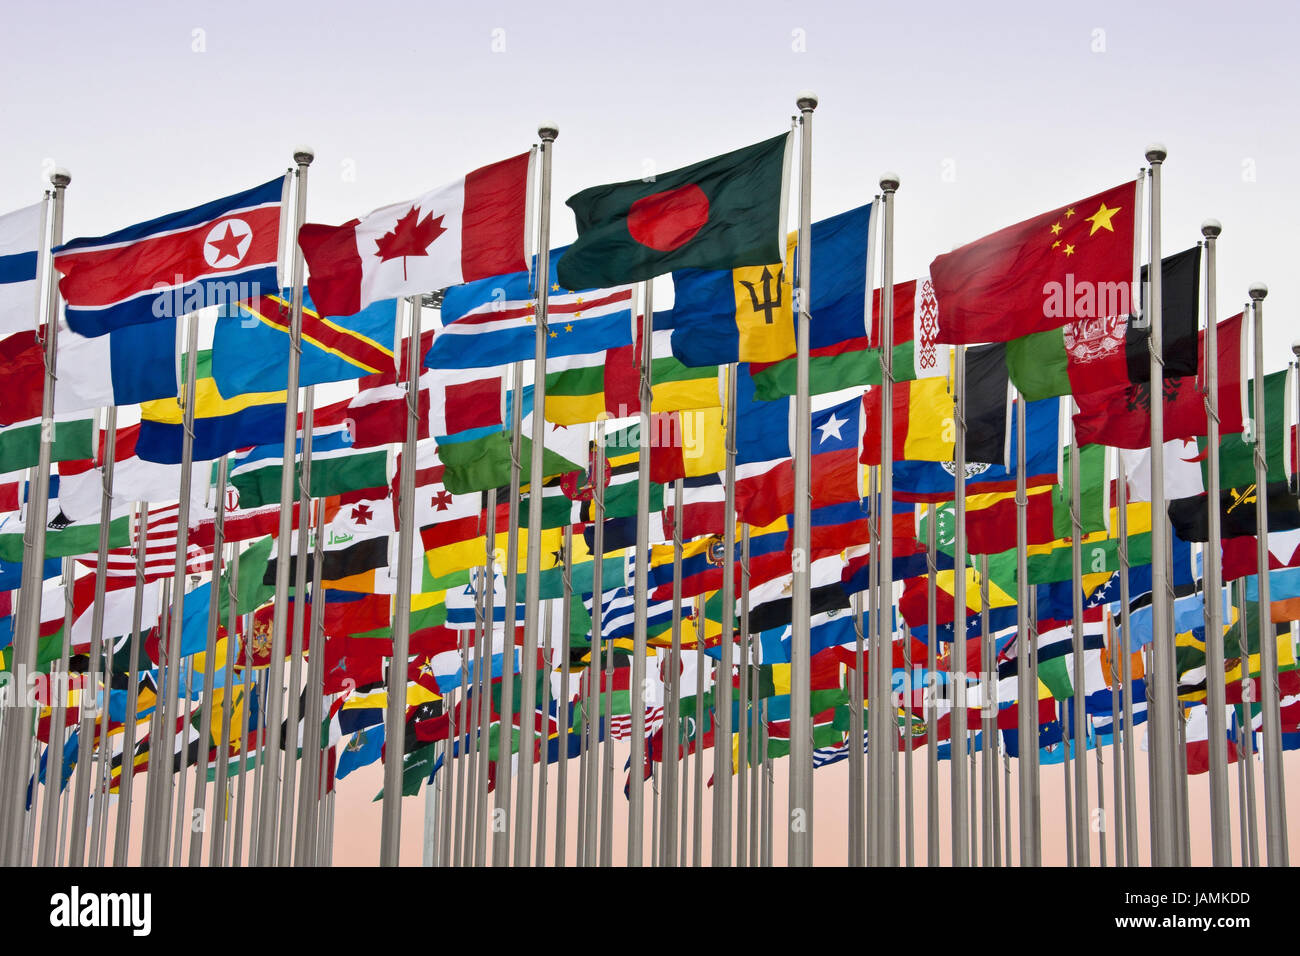 China,Shanghai,Expo in 2010,flags, Stock Photo